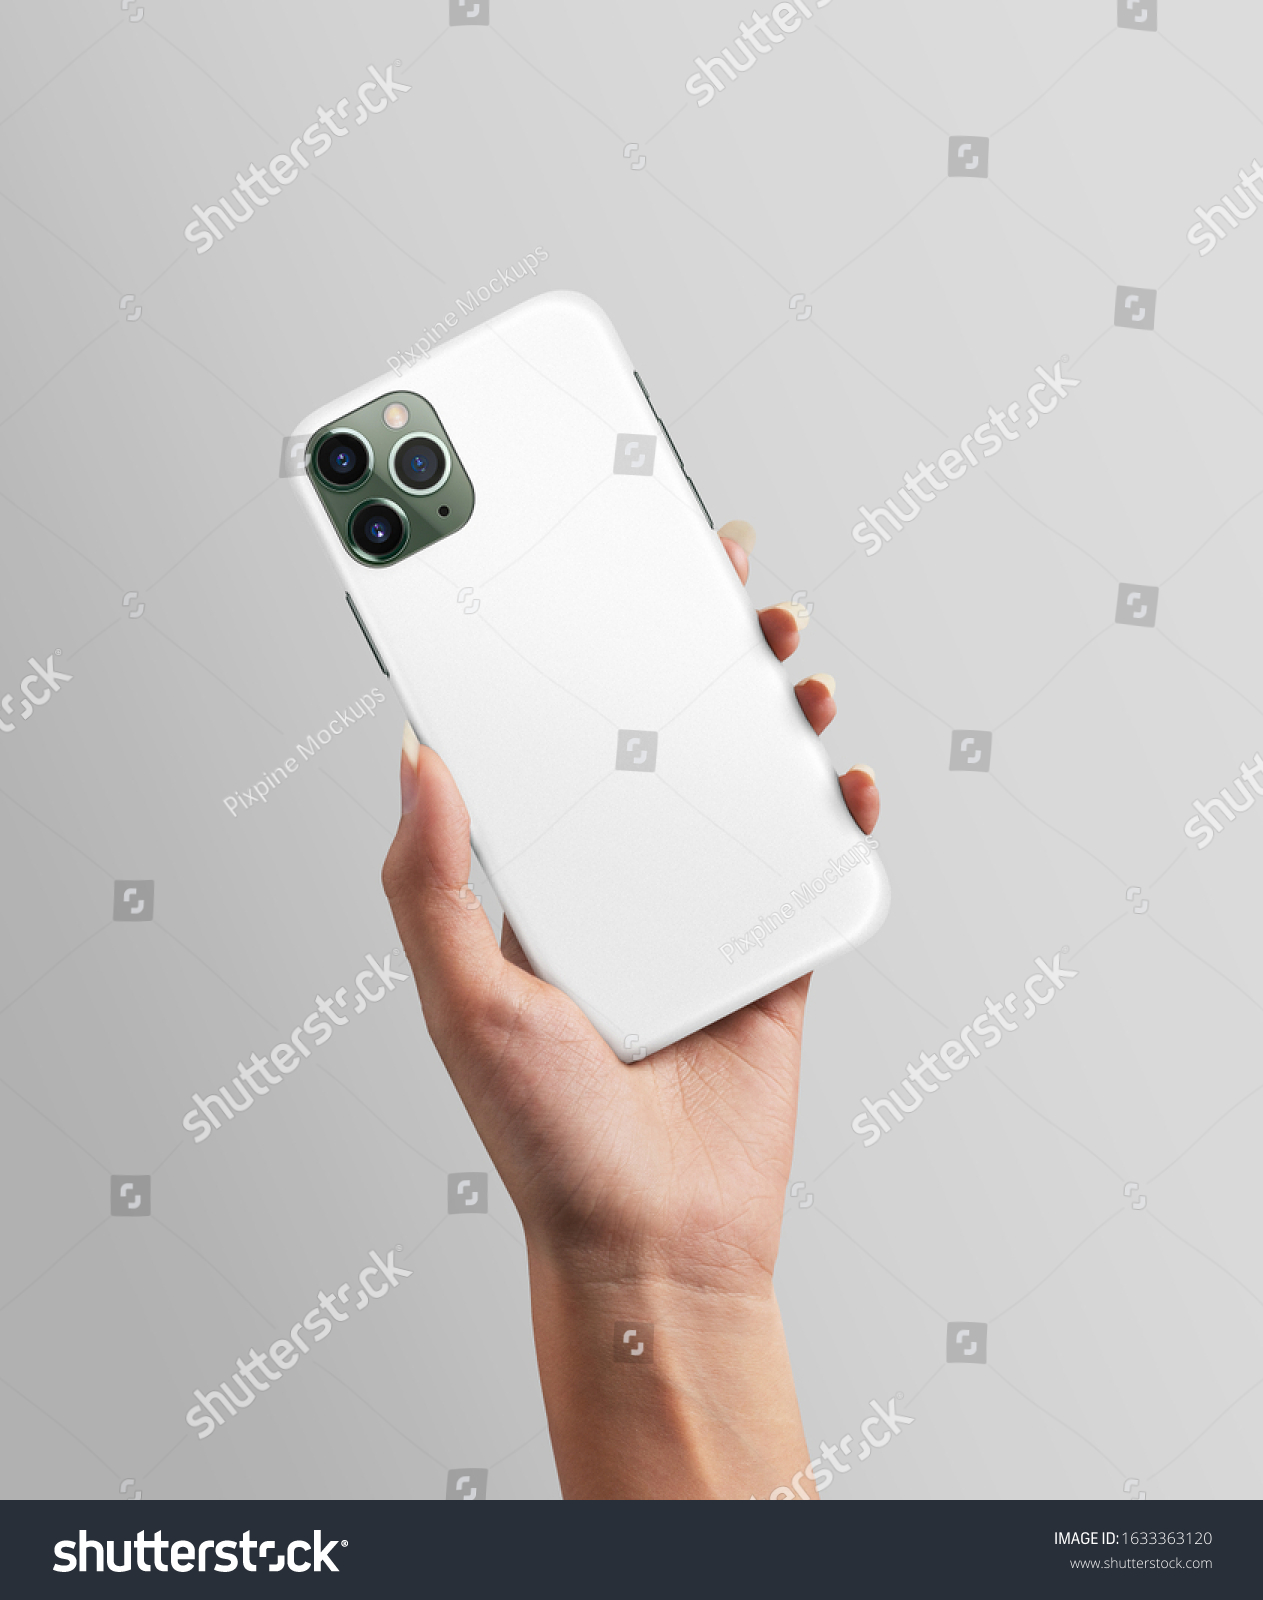 Woman hand holding Phone with plastic case mockup #1633363120